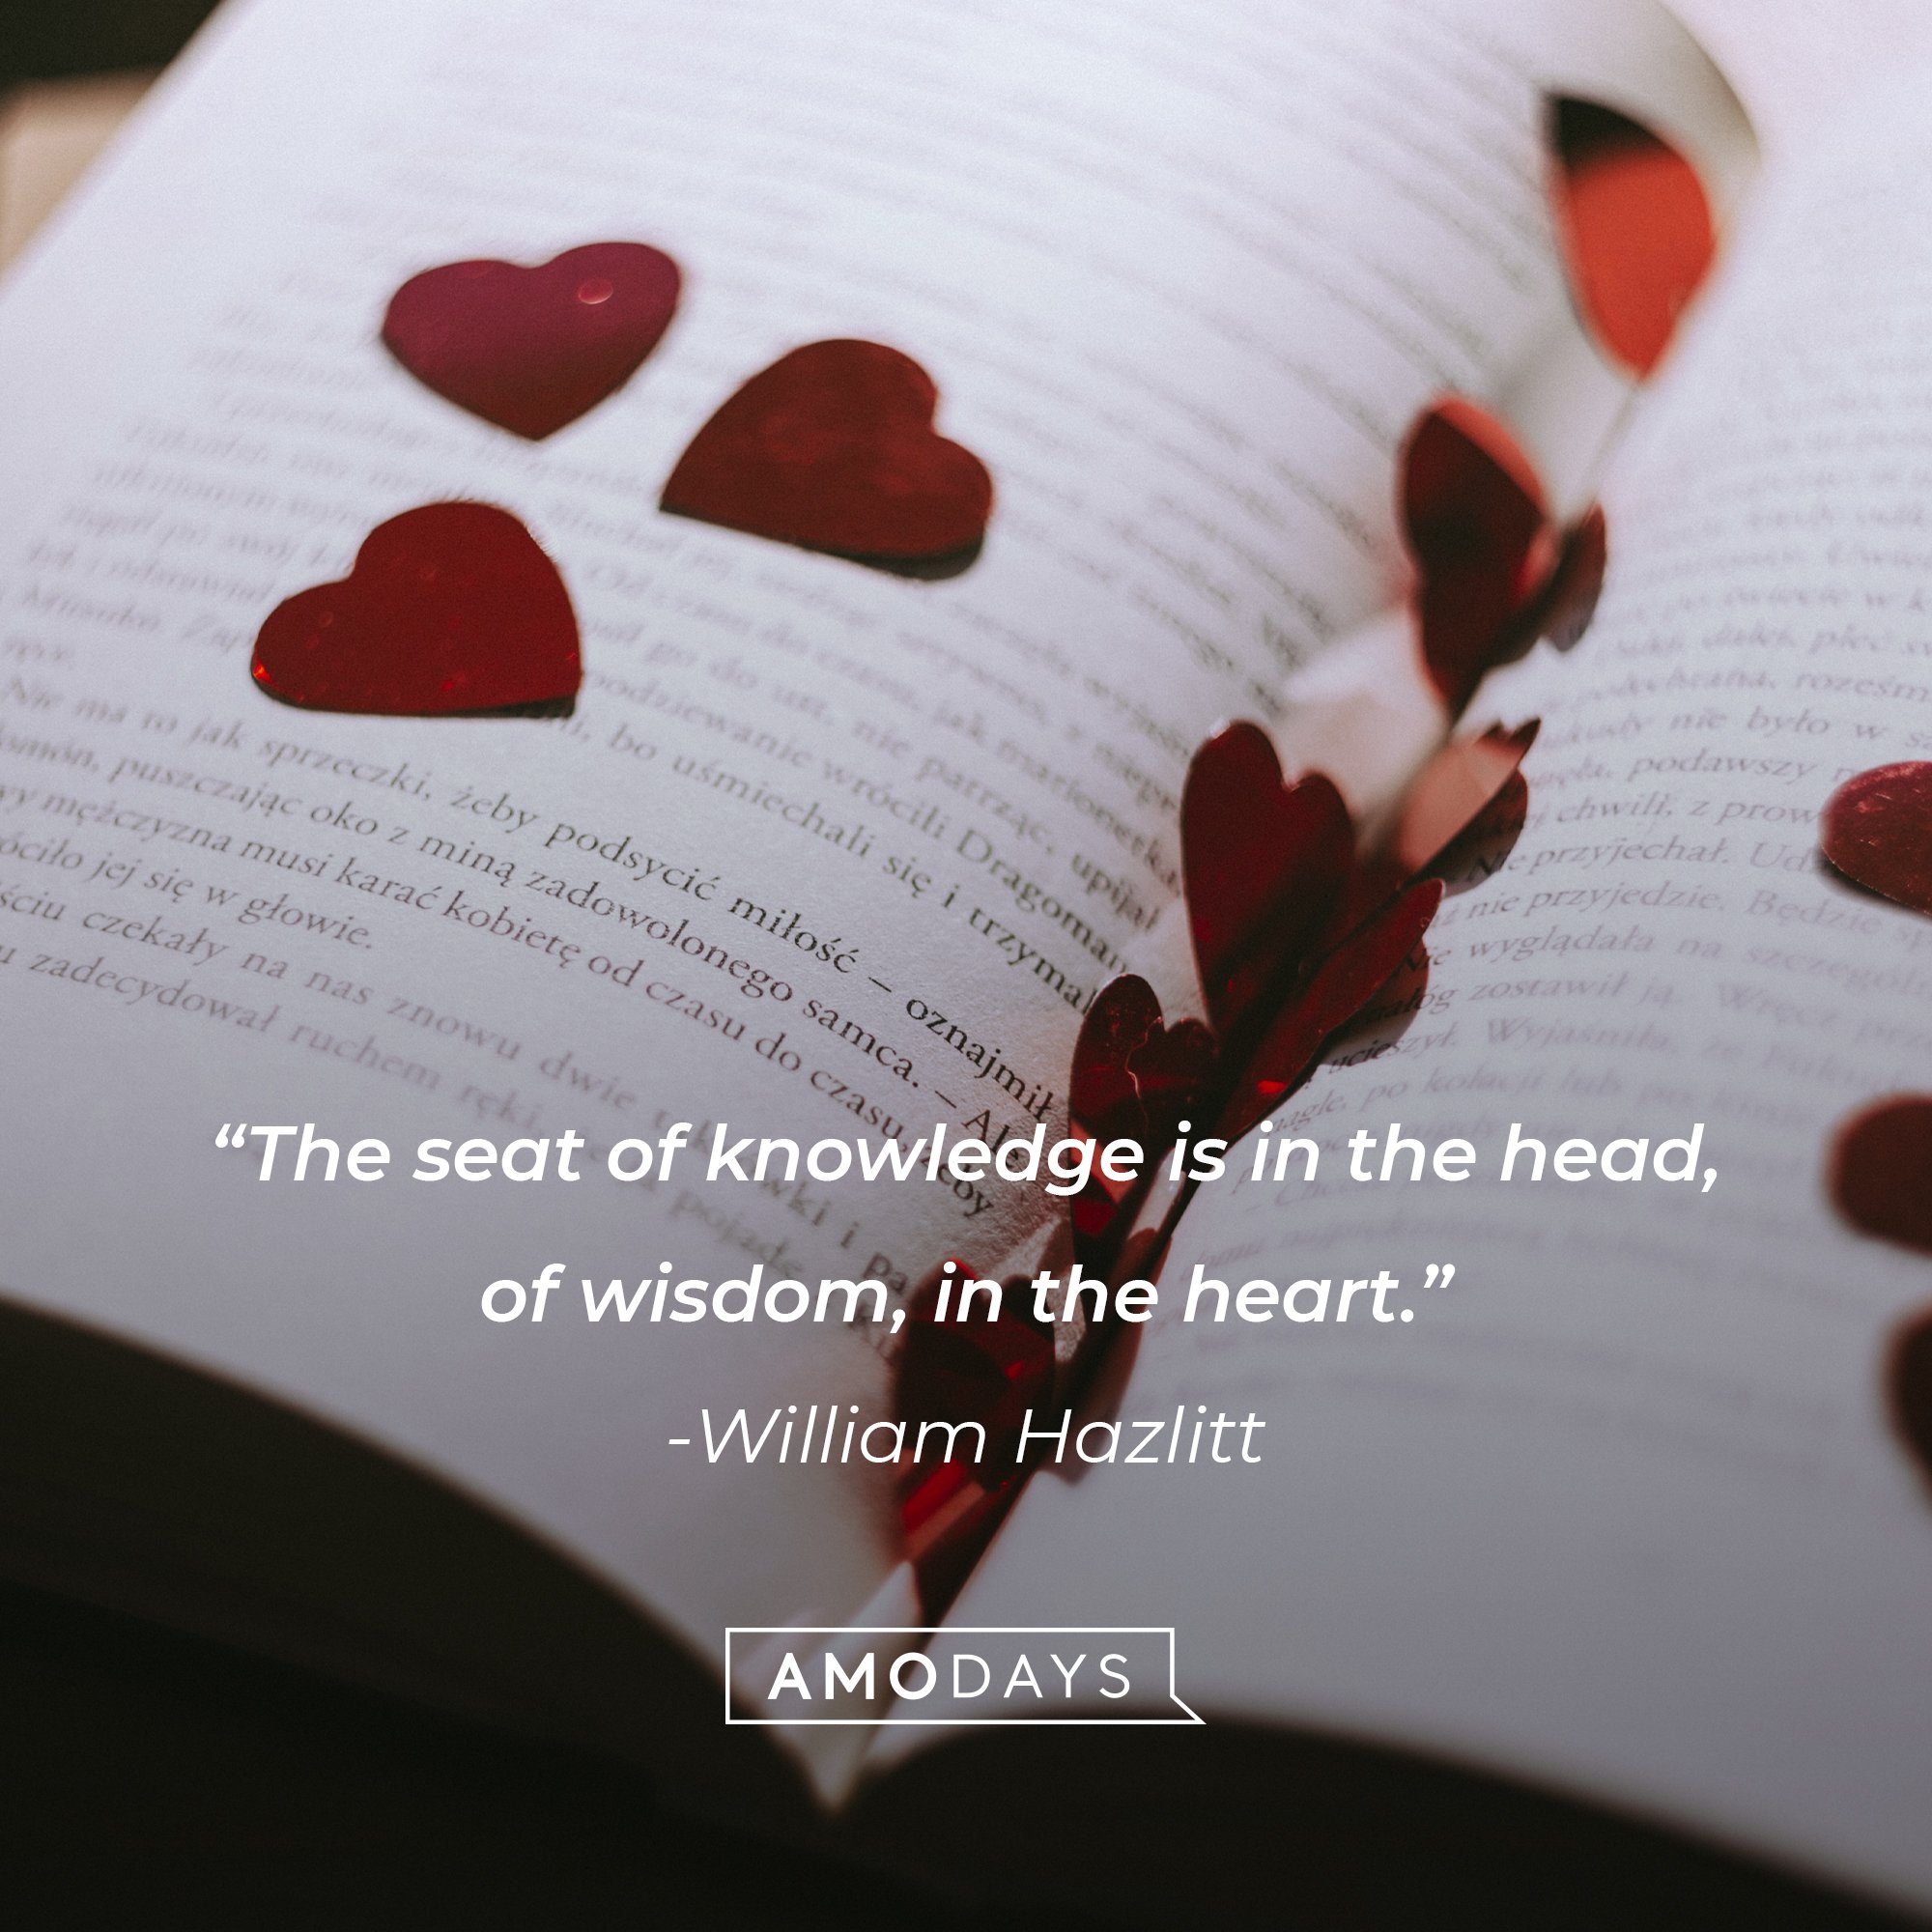 William Hazlitt's quote: "The seat of knowledge is in the head, of wisdom, in the heart." | Image: AmoDays